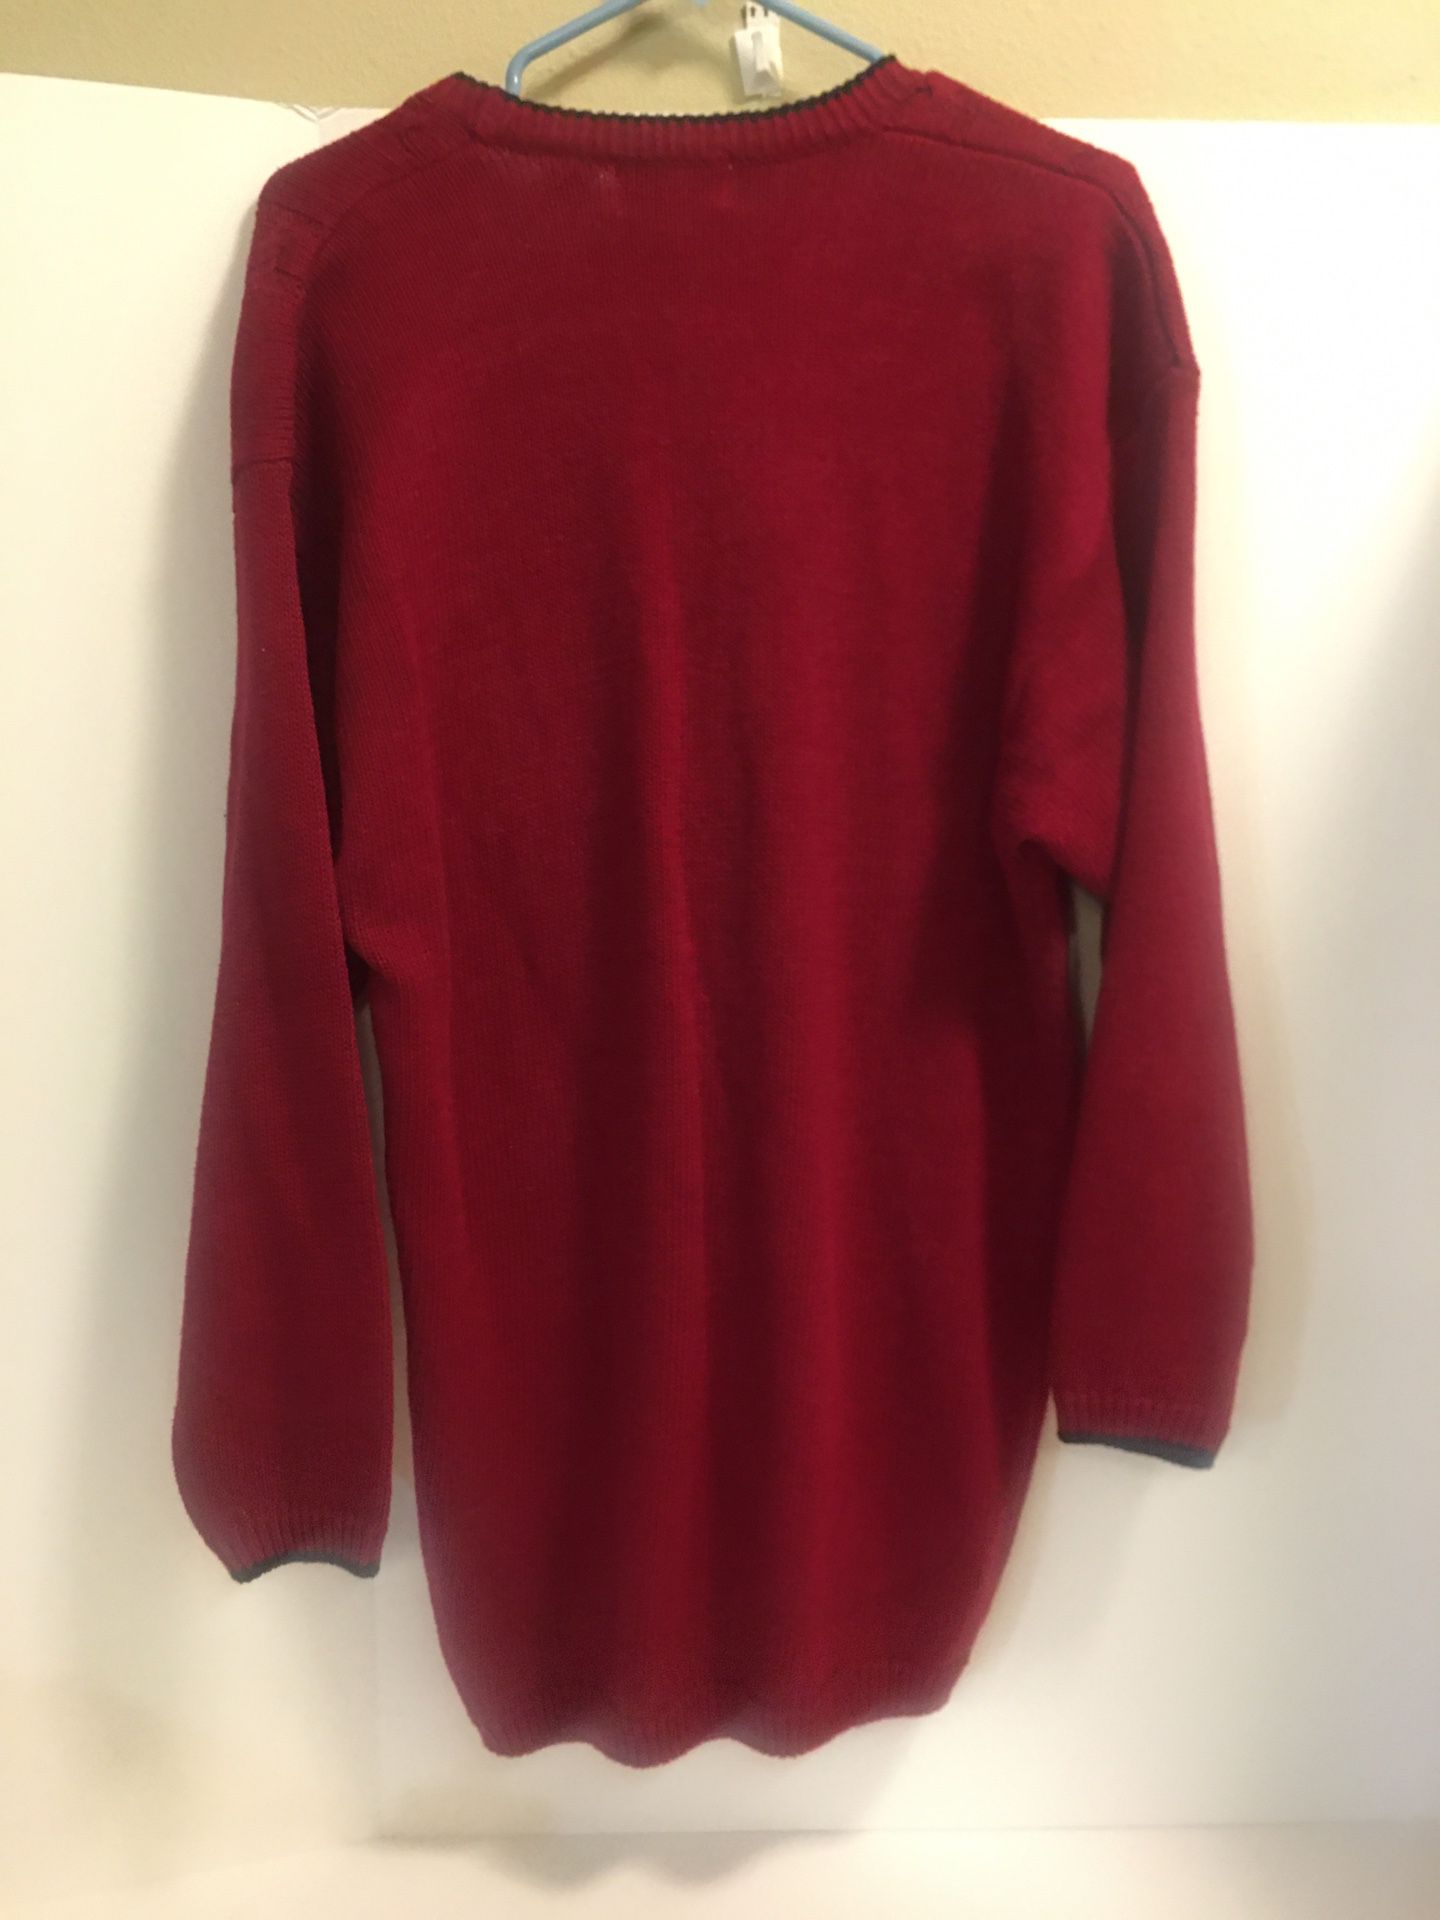 Women’s Hunts Point Soft V-Neck Sweater with shawl-collar. Size Large, warm insulating and breathable, full button front 